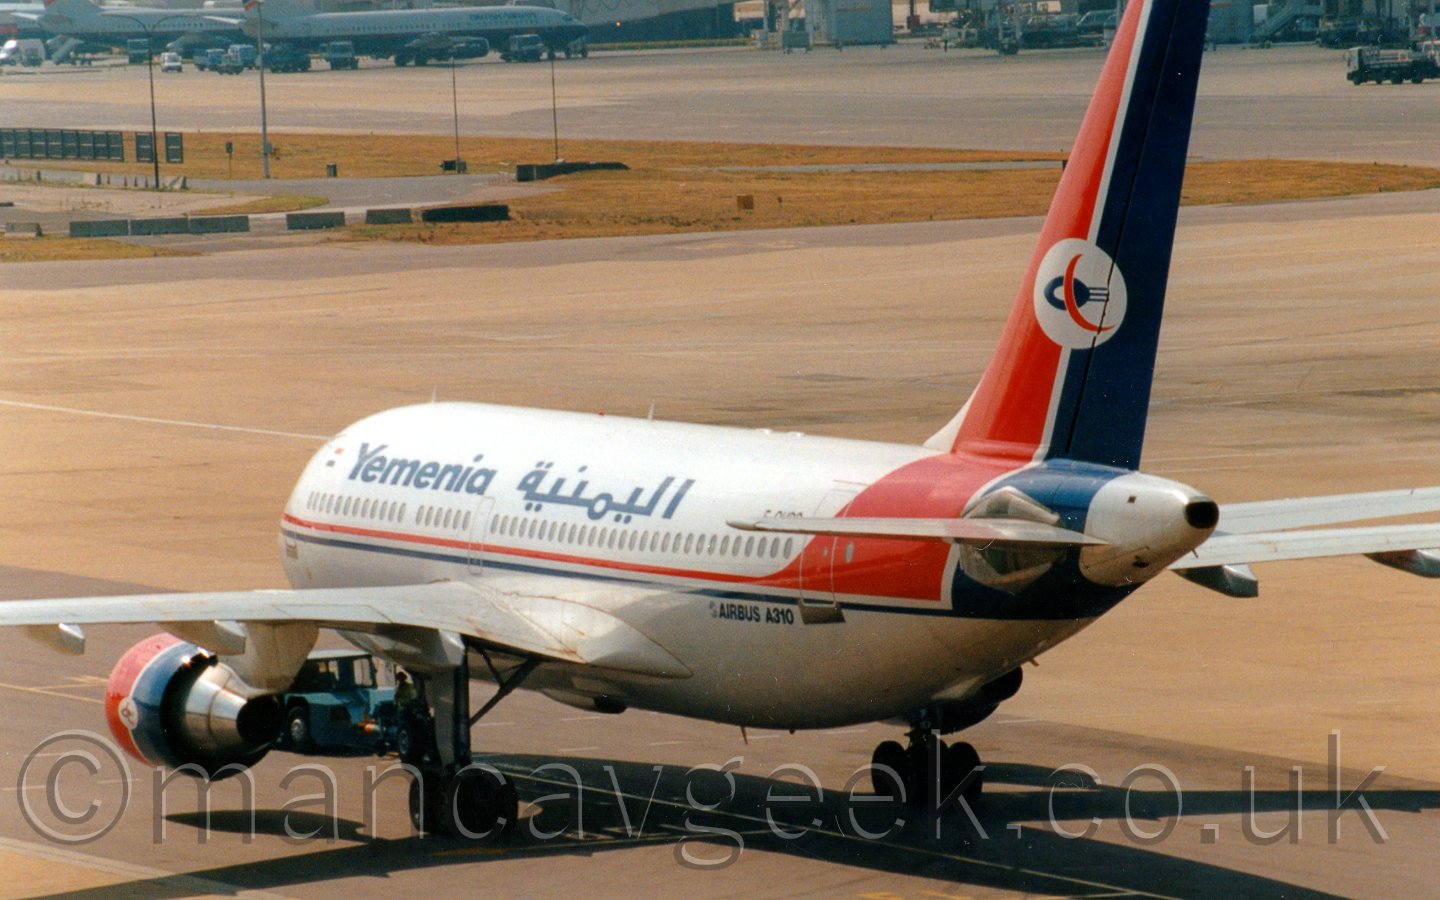 Side view of a twin engined jet airliner being pushed back from it's stand, facing to the left and away from the camera. The plane is mostly white, with a thin red and blue stripe running along the body and sweeping up to fill the tail.There are dark blue "Yemenia" titles on the upper fuselage, in English at the front, and in an Arabiv script towards the middle. The tail has a white circle, with a dark blue oval with a white hoile, and 3 lines trailing off the back, with a red crescent overlaid on top. There are "Airbus A310" titles on the lower rear fuselage. The engine pods are red at the front, and blue at the rear. There is a blue tow truck attached to the nose gear. In the backgrpound is a view across the airfield, mostly concrete apron, with a handful of airliners parked by a large building in the top left corner.